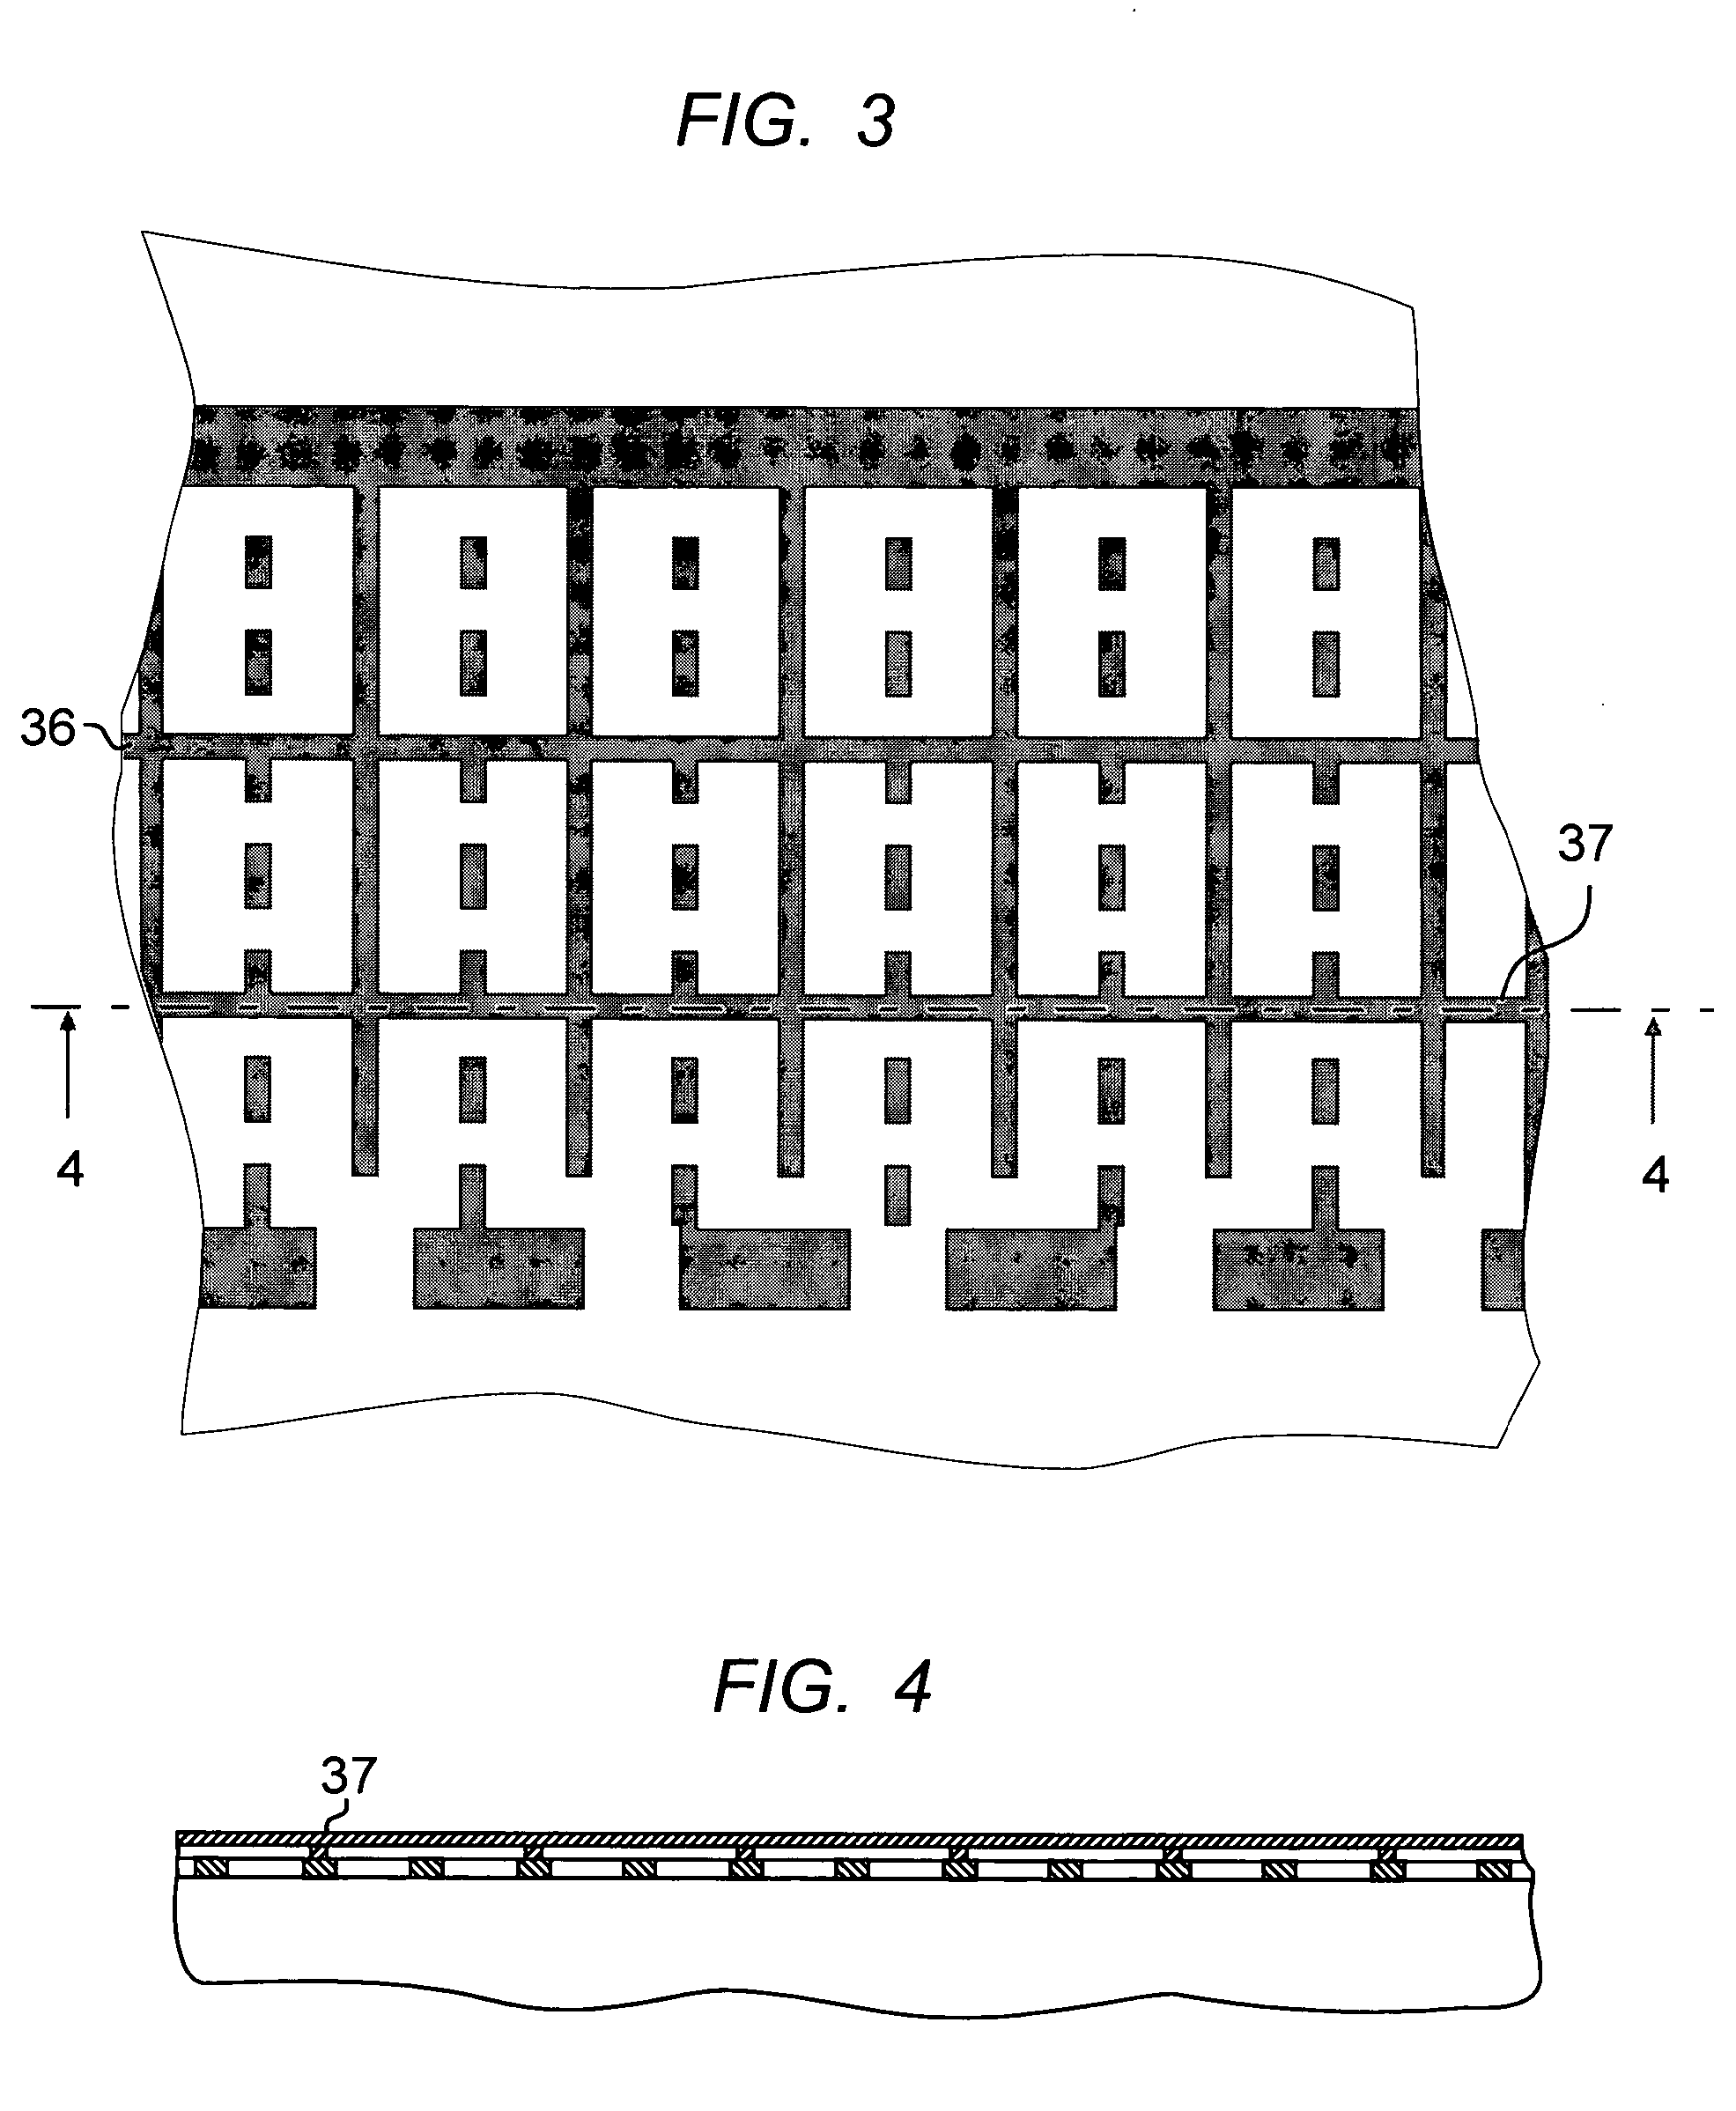 Lateral double diffused MOS transistors